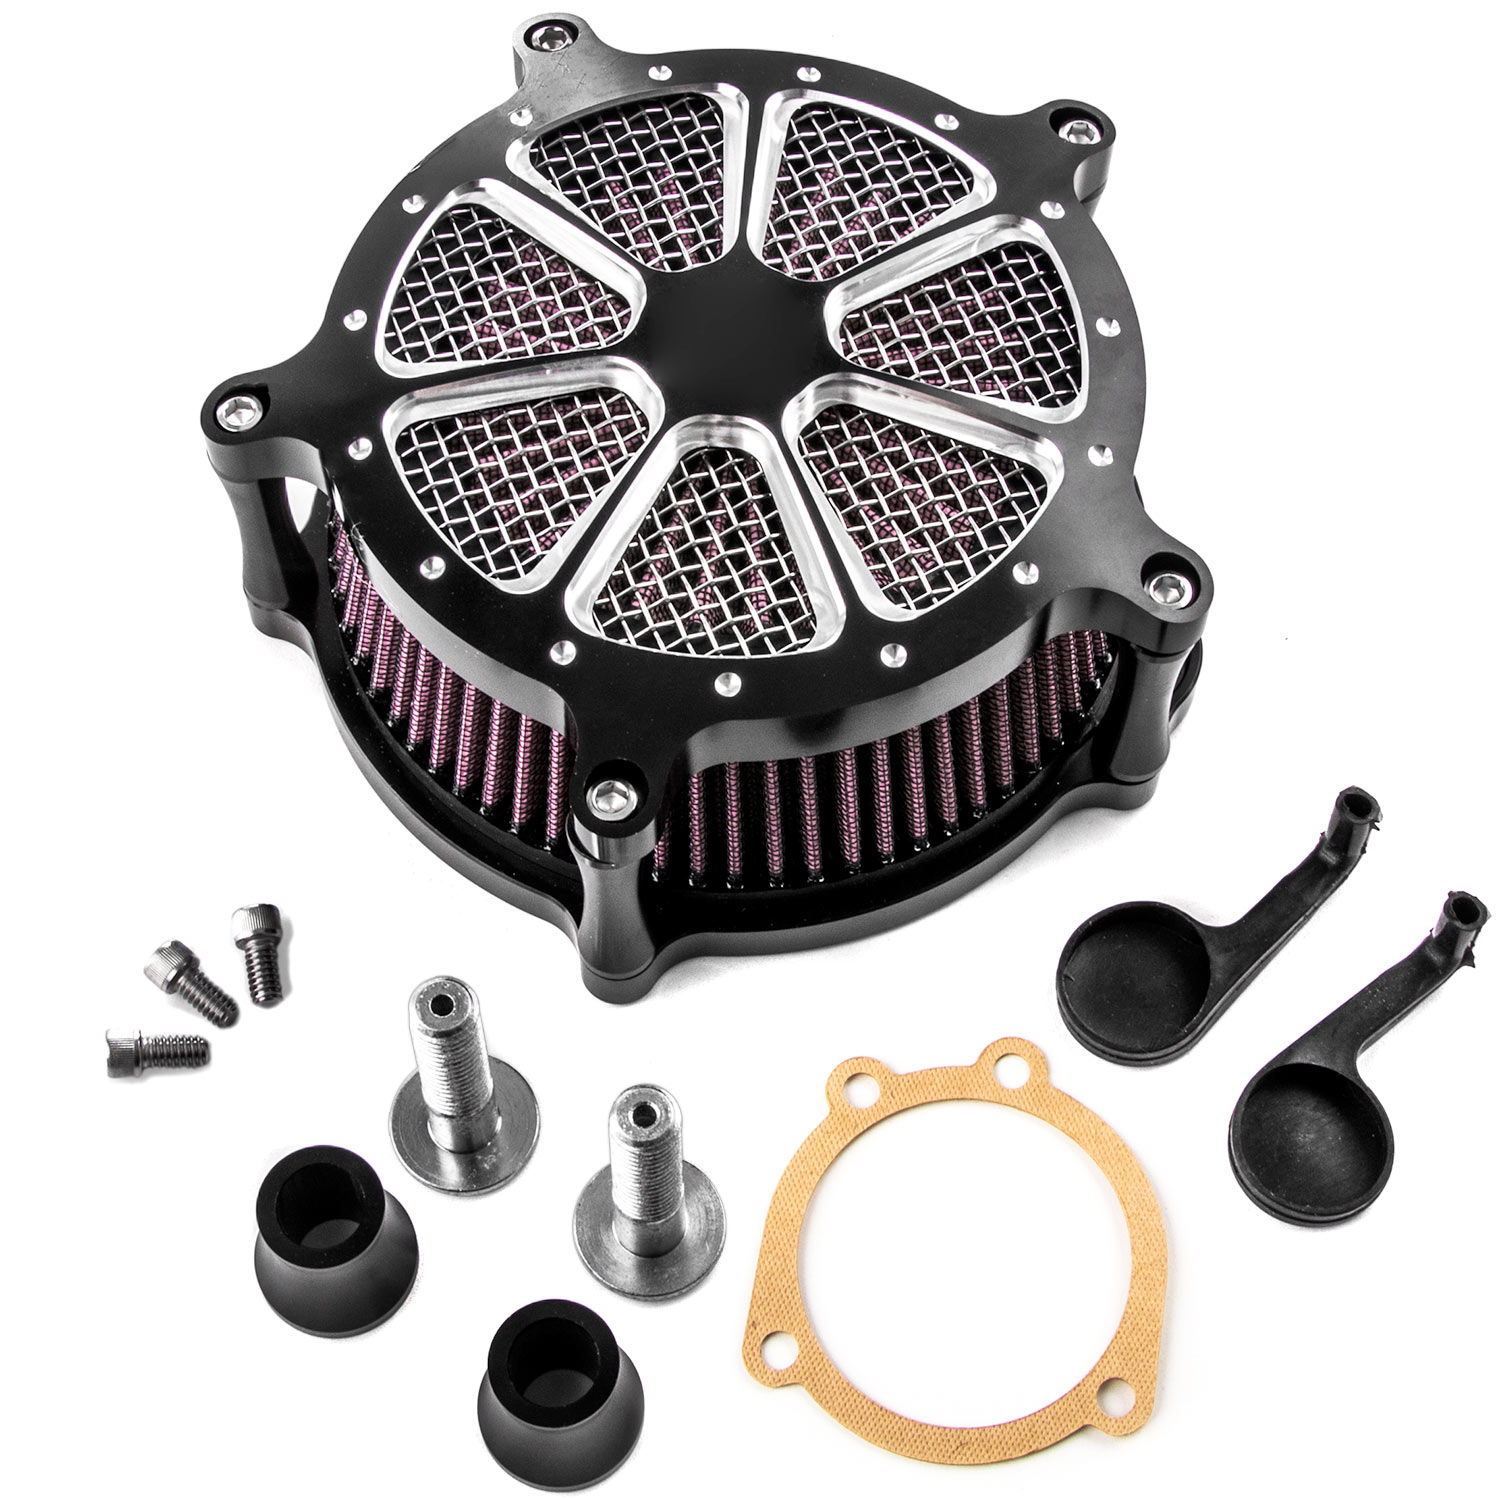 Krator Turbine Edge Cut Air Intake Kit Compatible with Harley Sportster XL1200 Iron 883 Forty Eight Sportster Sport XL1200S 1996-2003